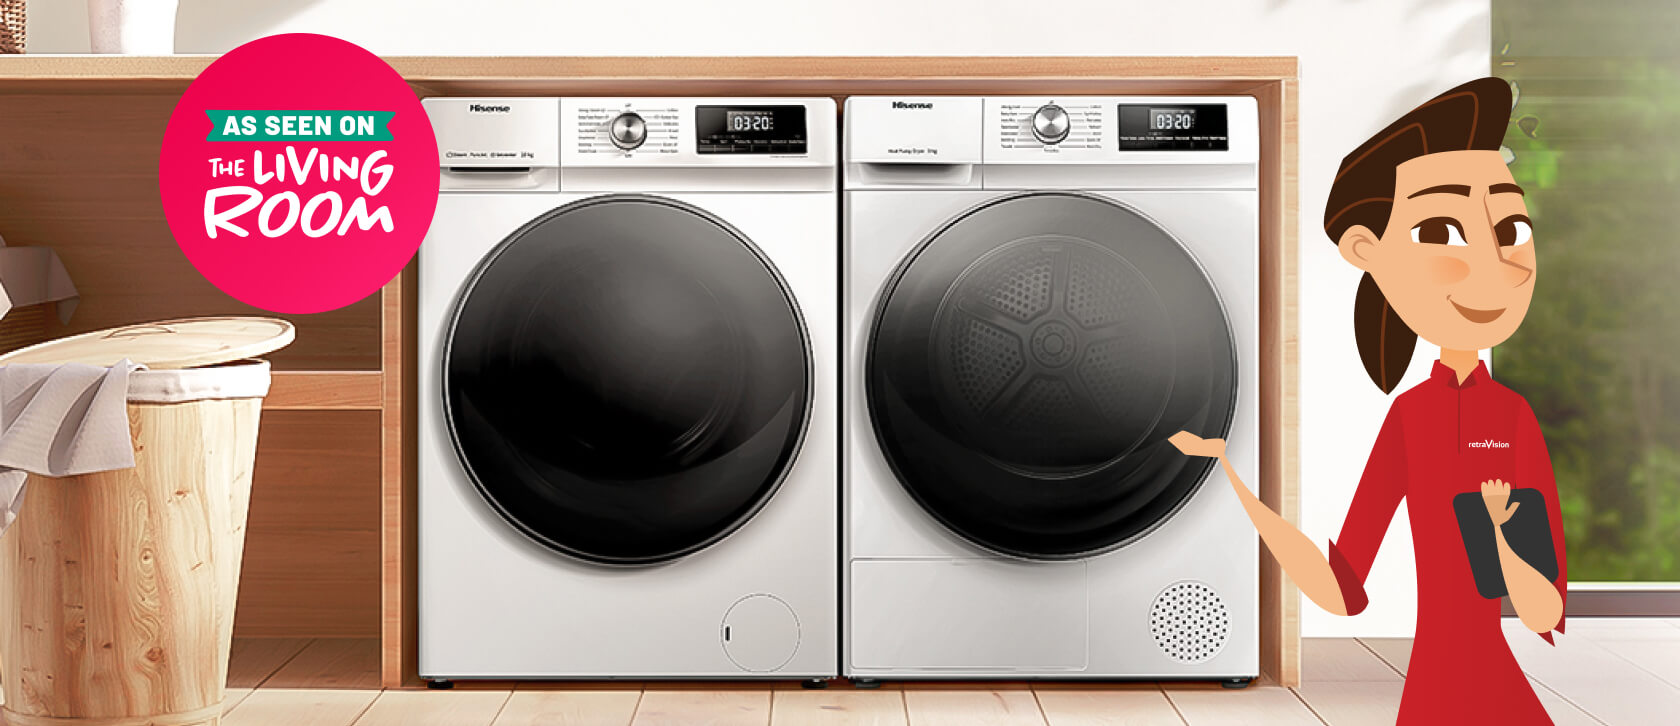 Retravision character in a laundry with Hisense appliances